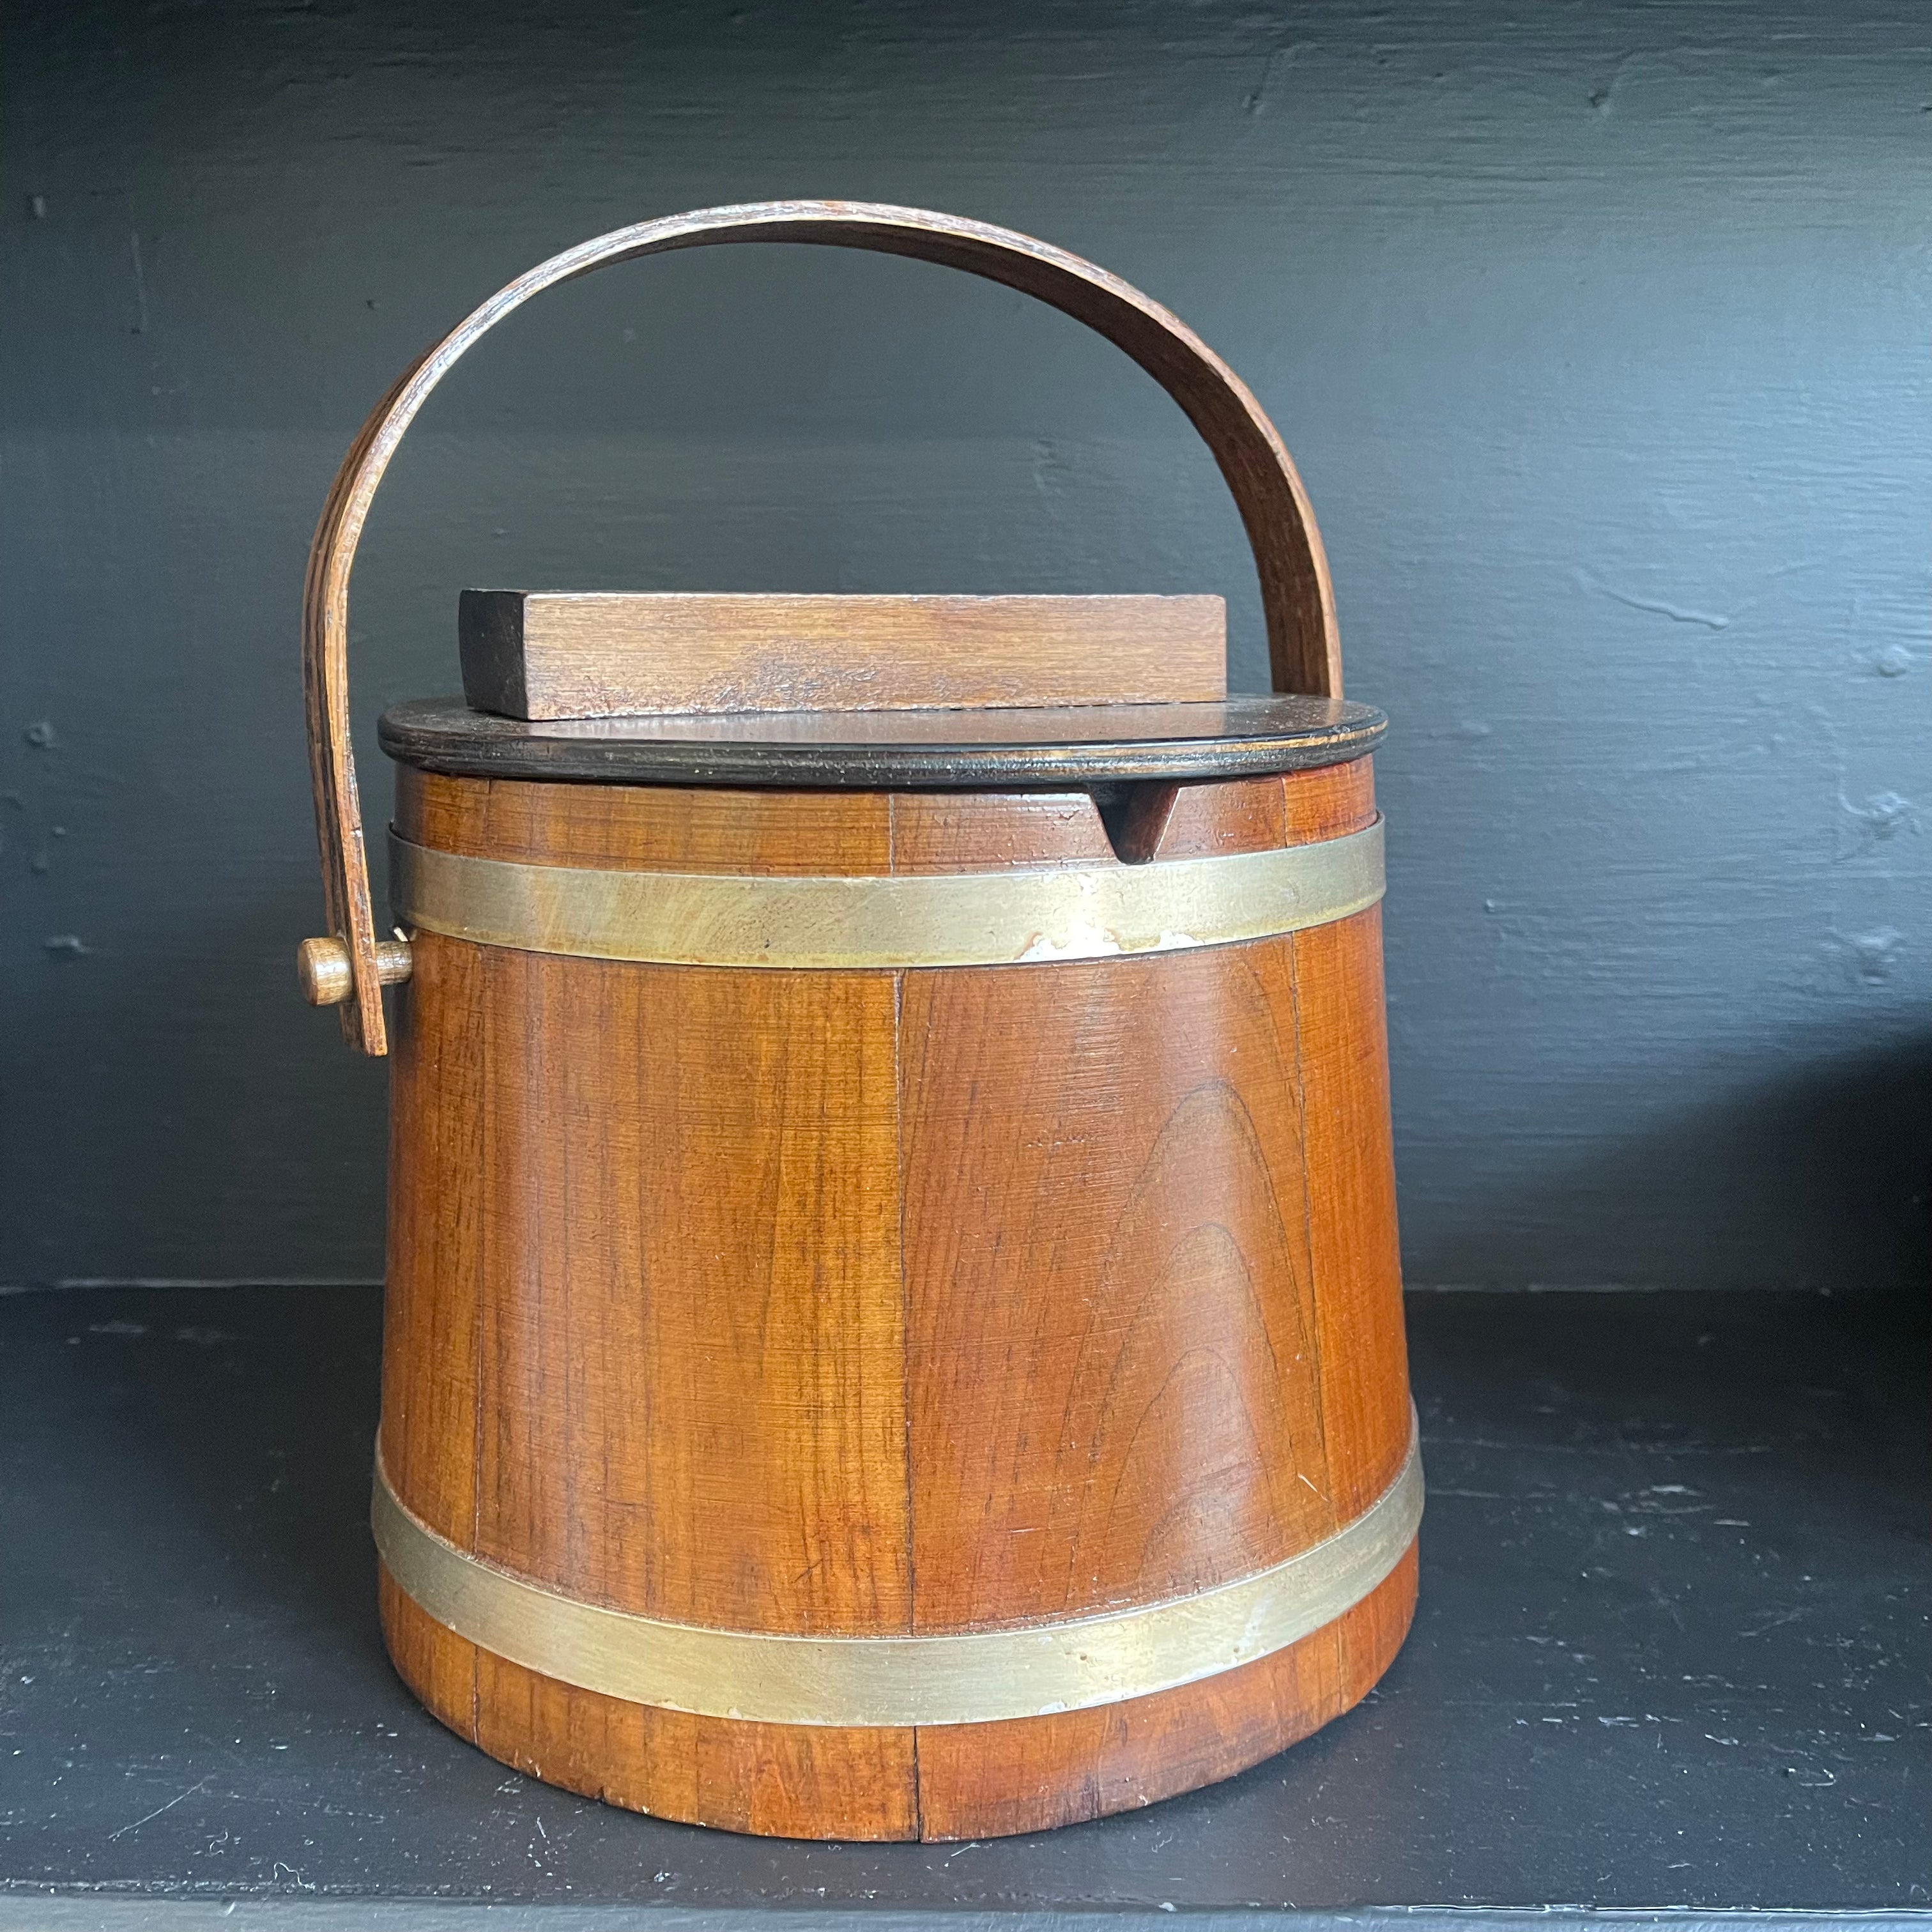 Dean Hood Project/Yarn Container (Barrel with Top and Handle)